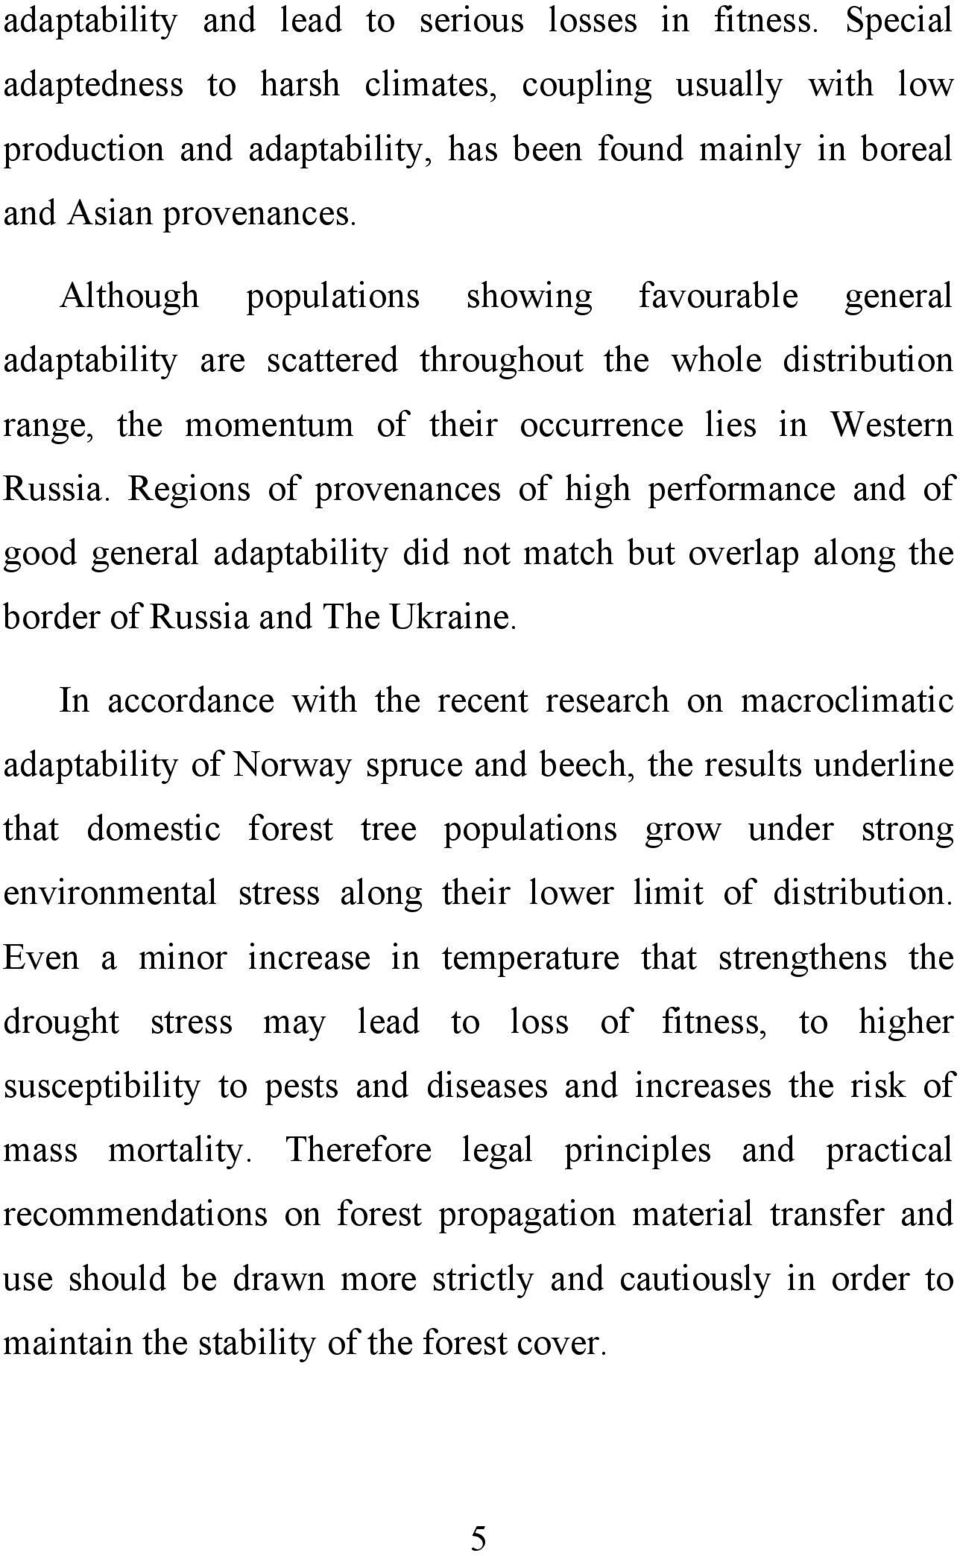 Regions of provenances of high performance and of good general adaptability did not match but overlap along the border of Russia and The Ukraine.